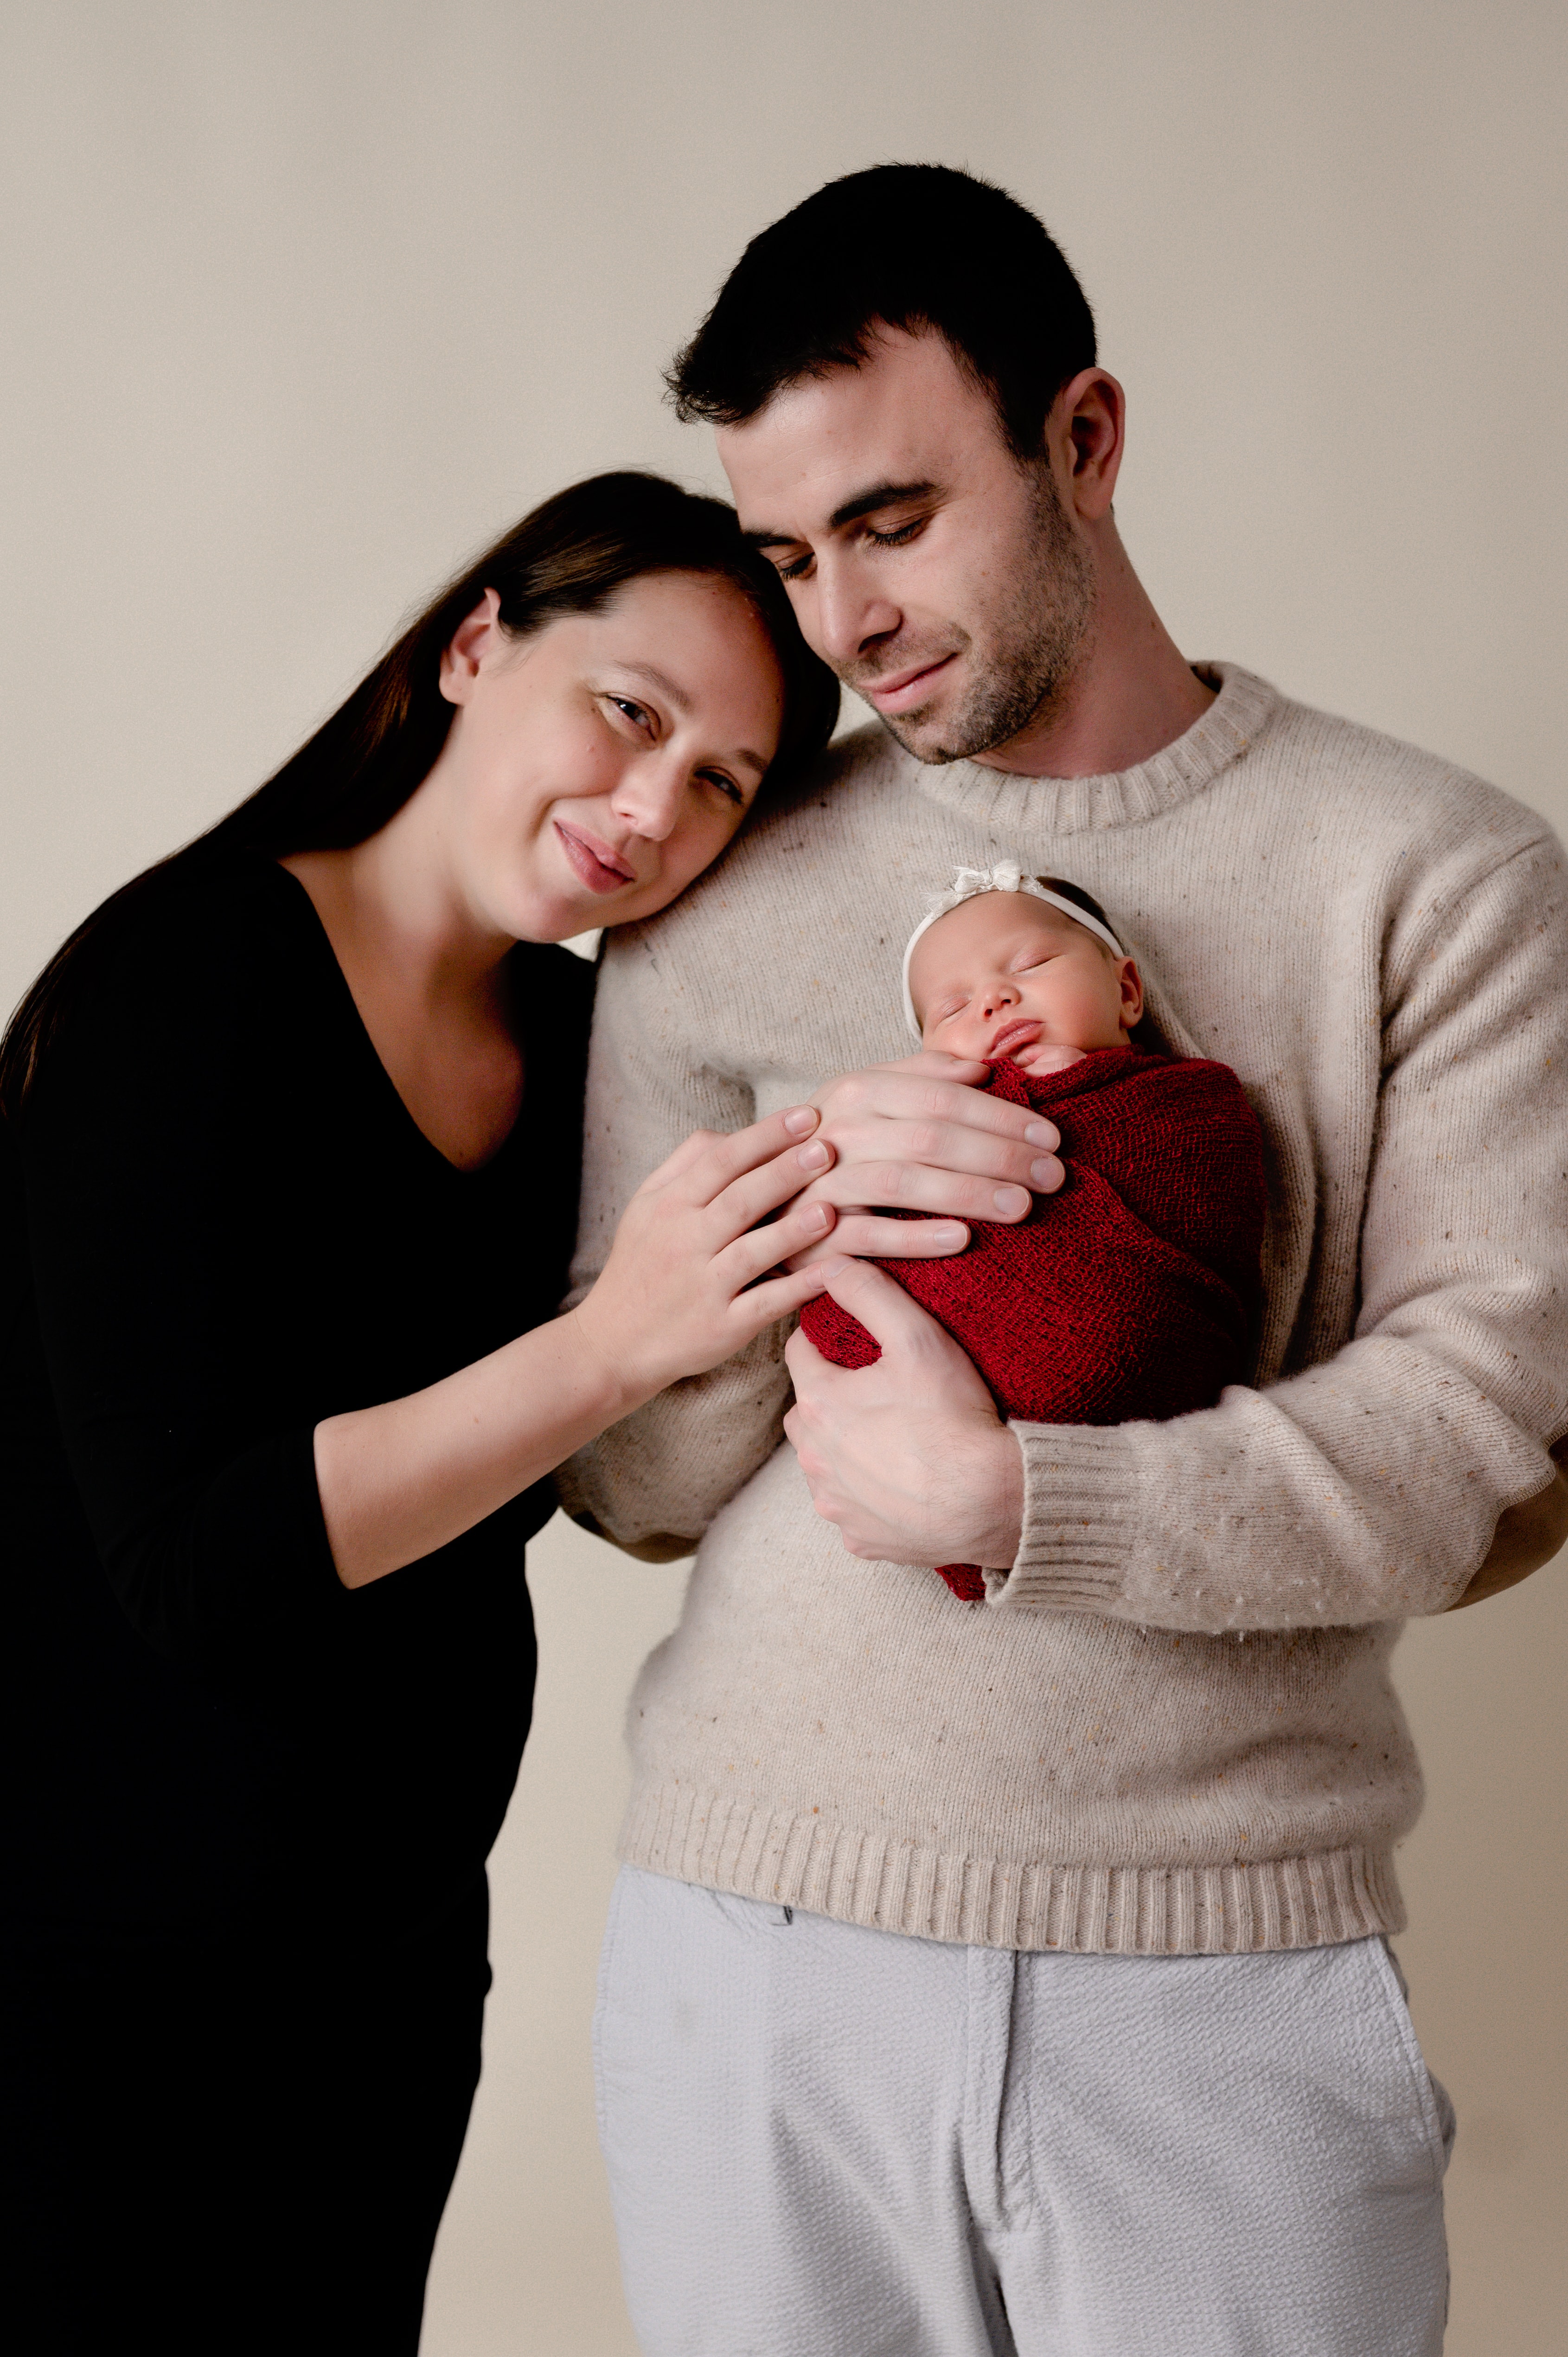 Family newborn photoshoot in studio. Dad is holding baby while mom and dad are cuddled up together.